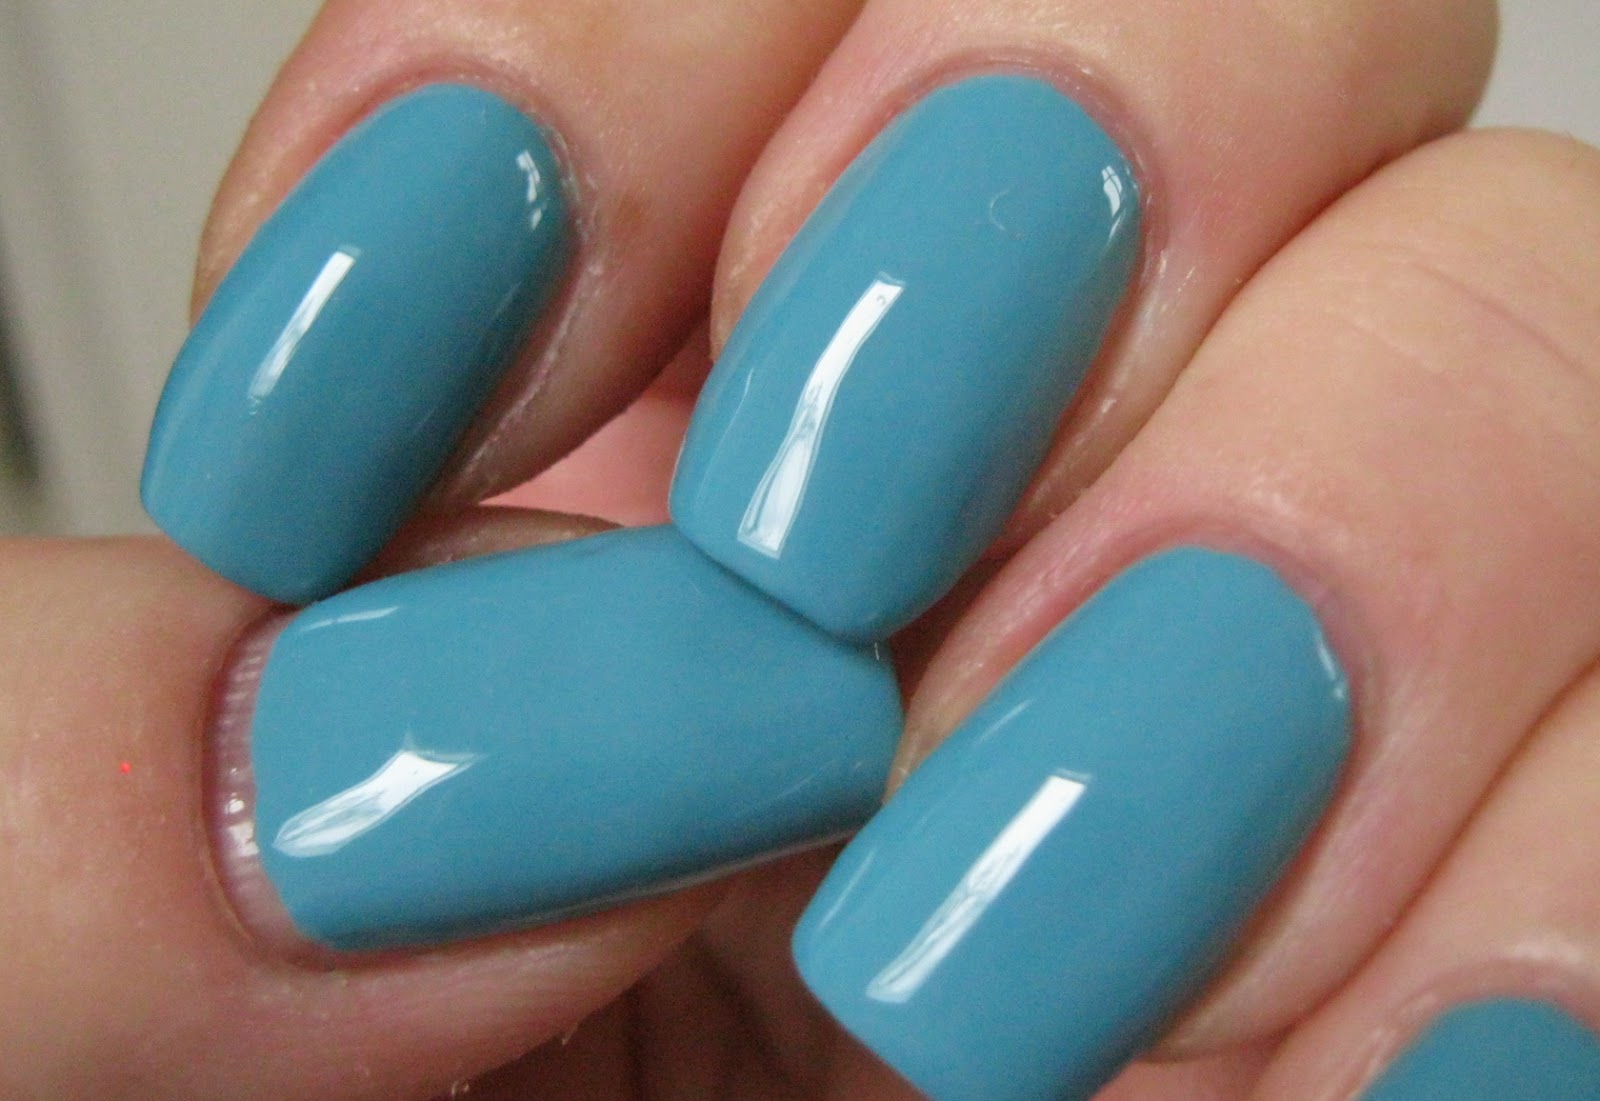 5. OPI Infinite Shine Nail Polish in "Can't Find My Czechbook" - wide 6